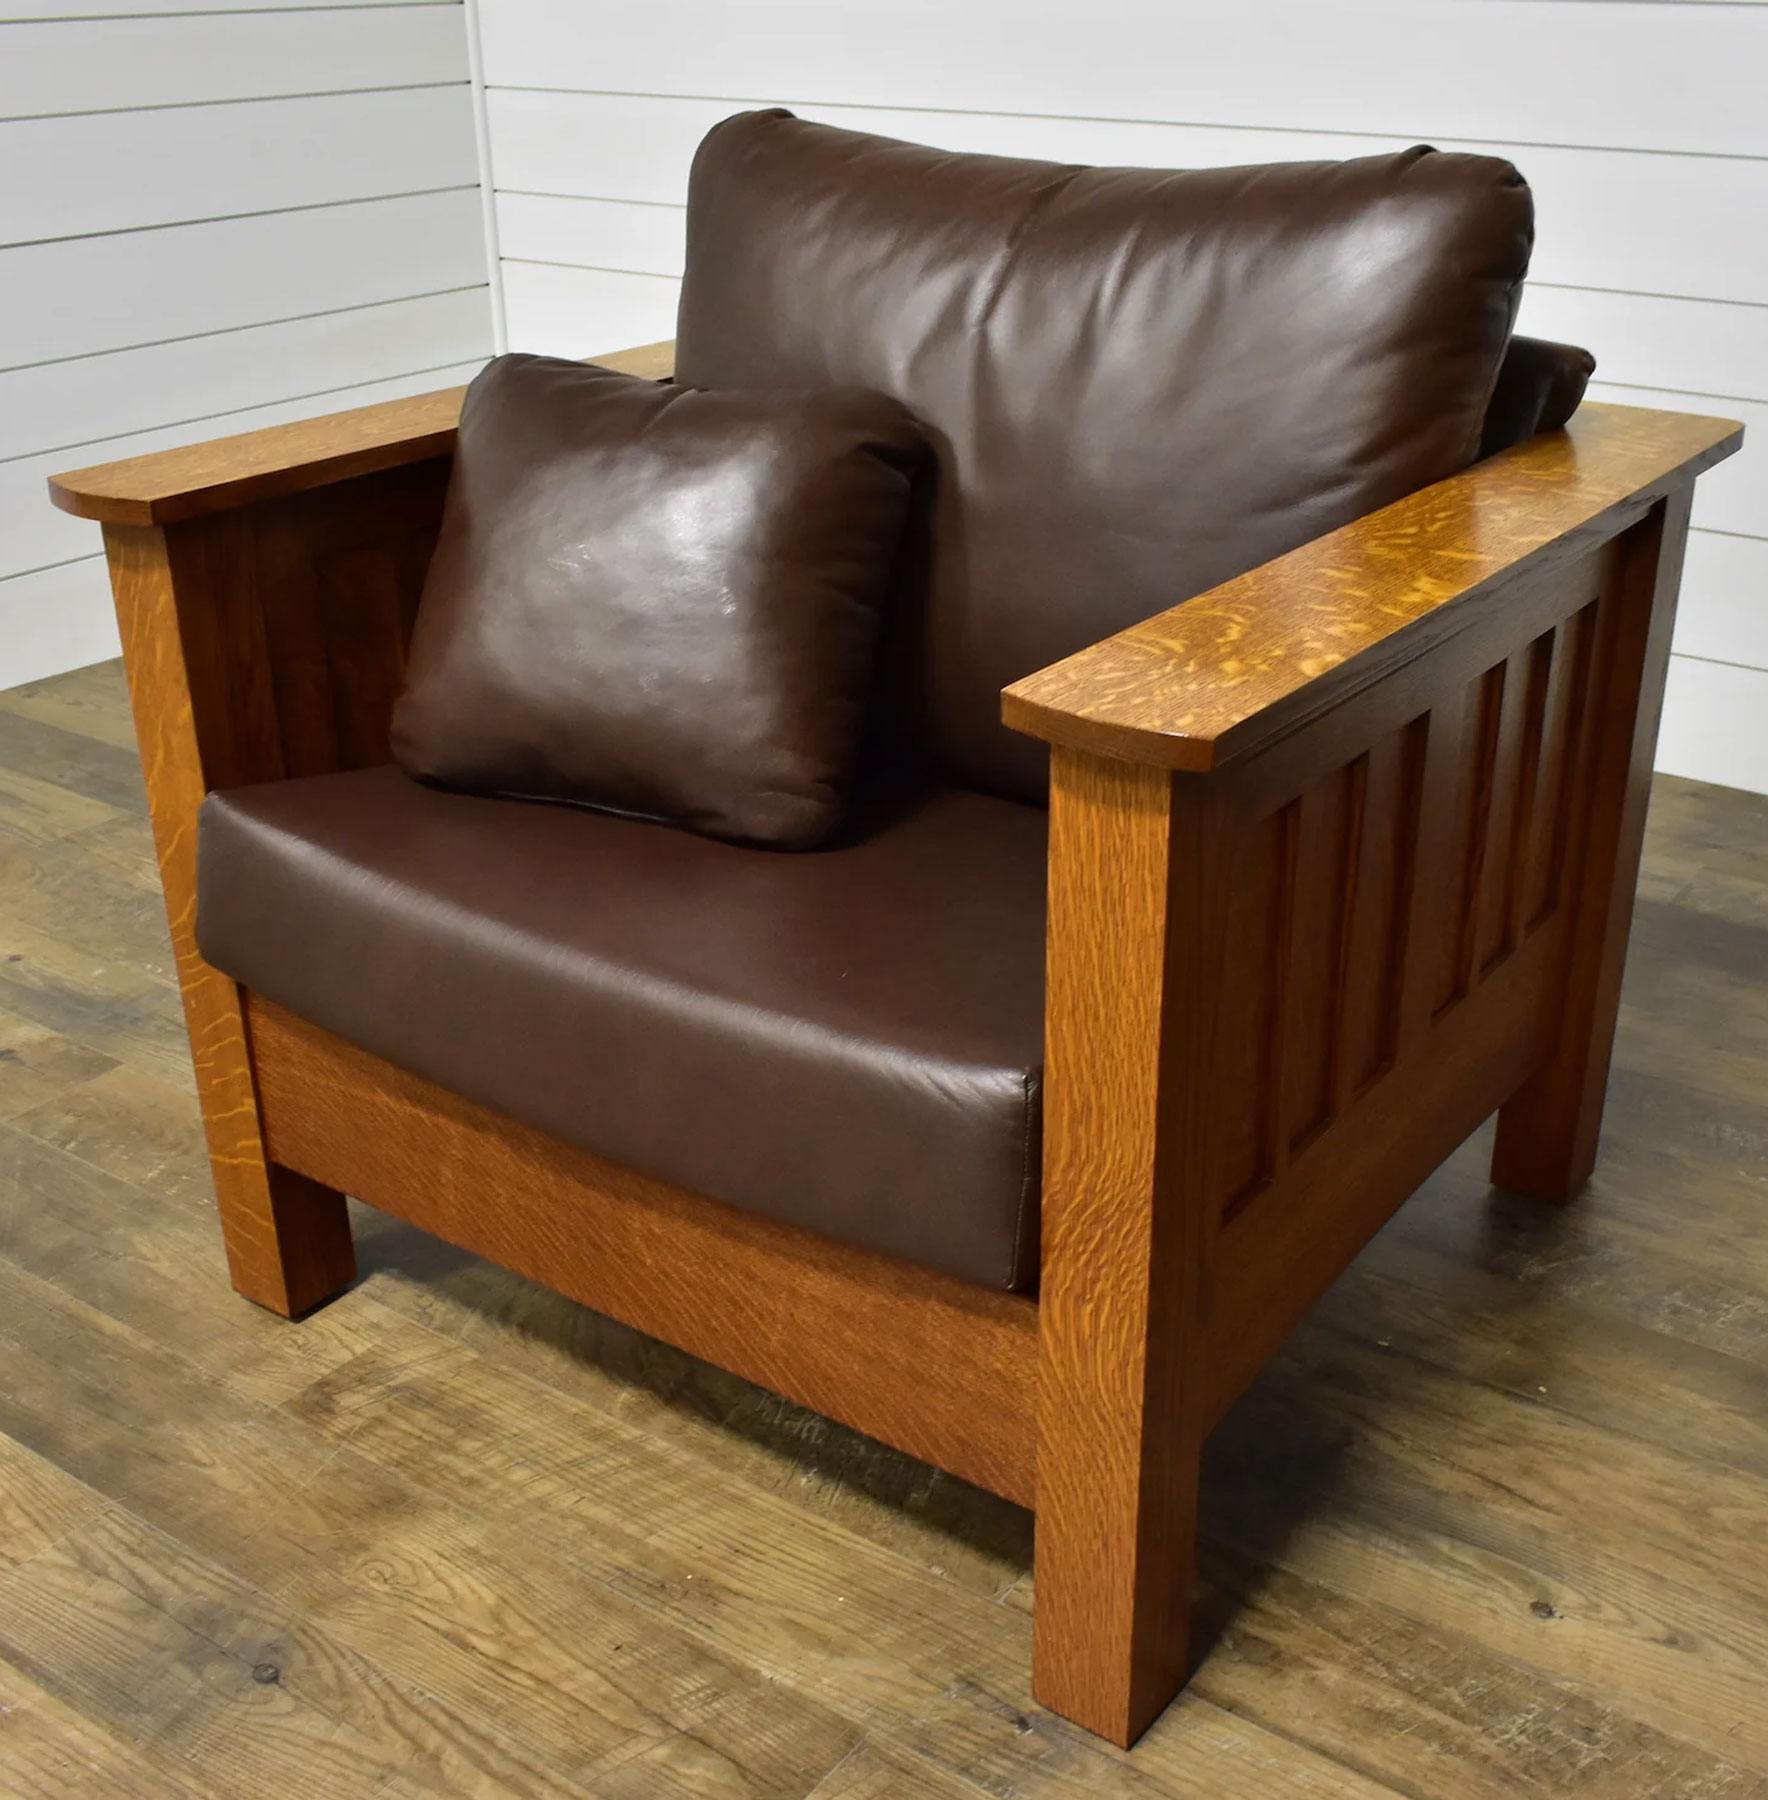 Mission Seating Chair in Quartersawn White Oak